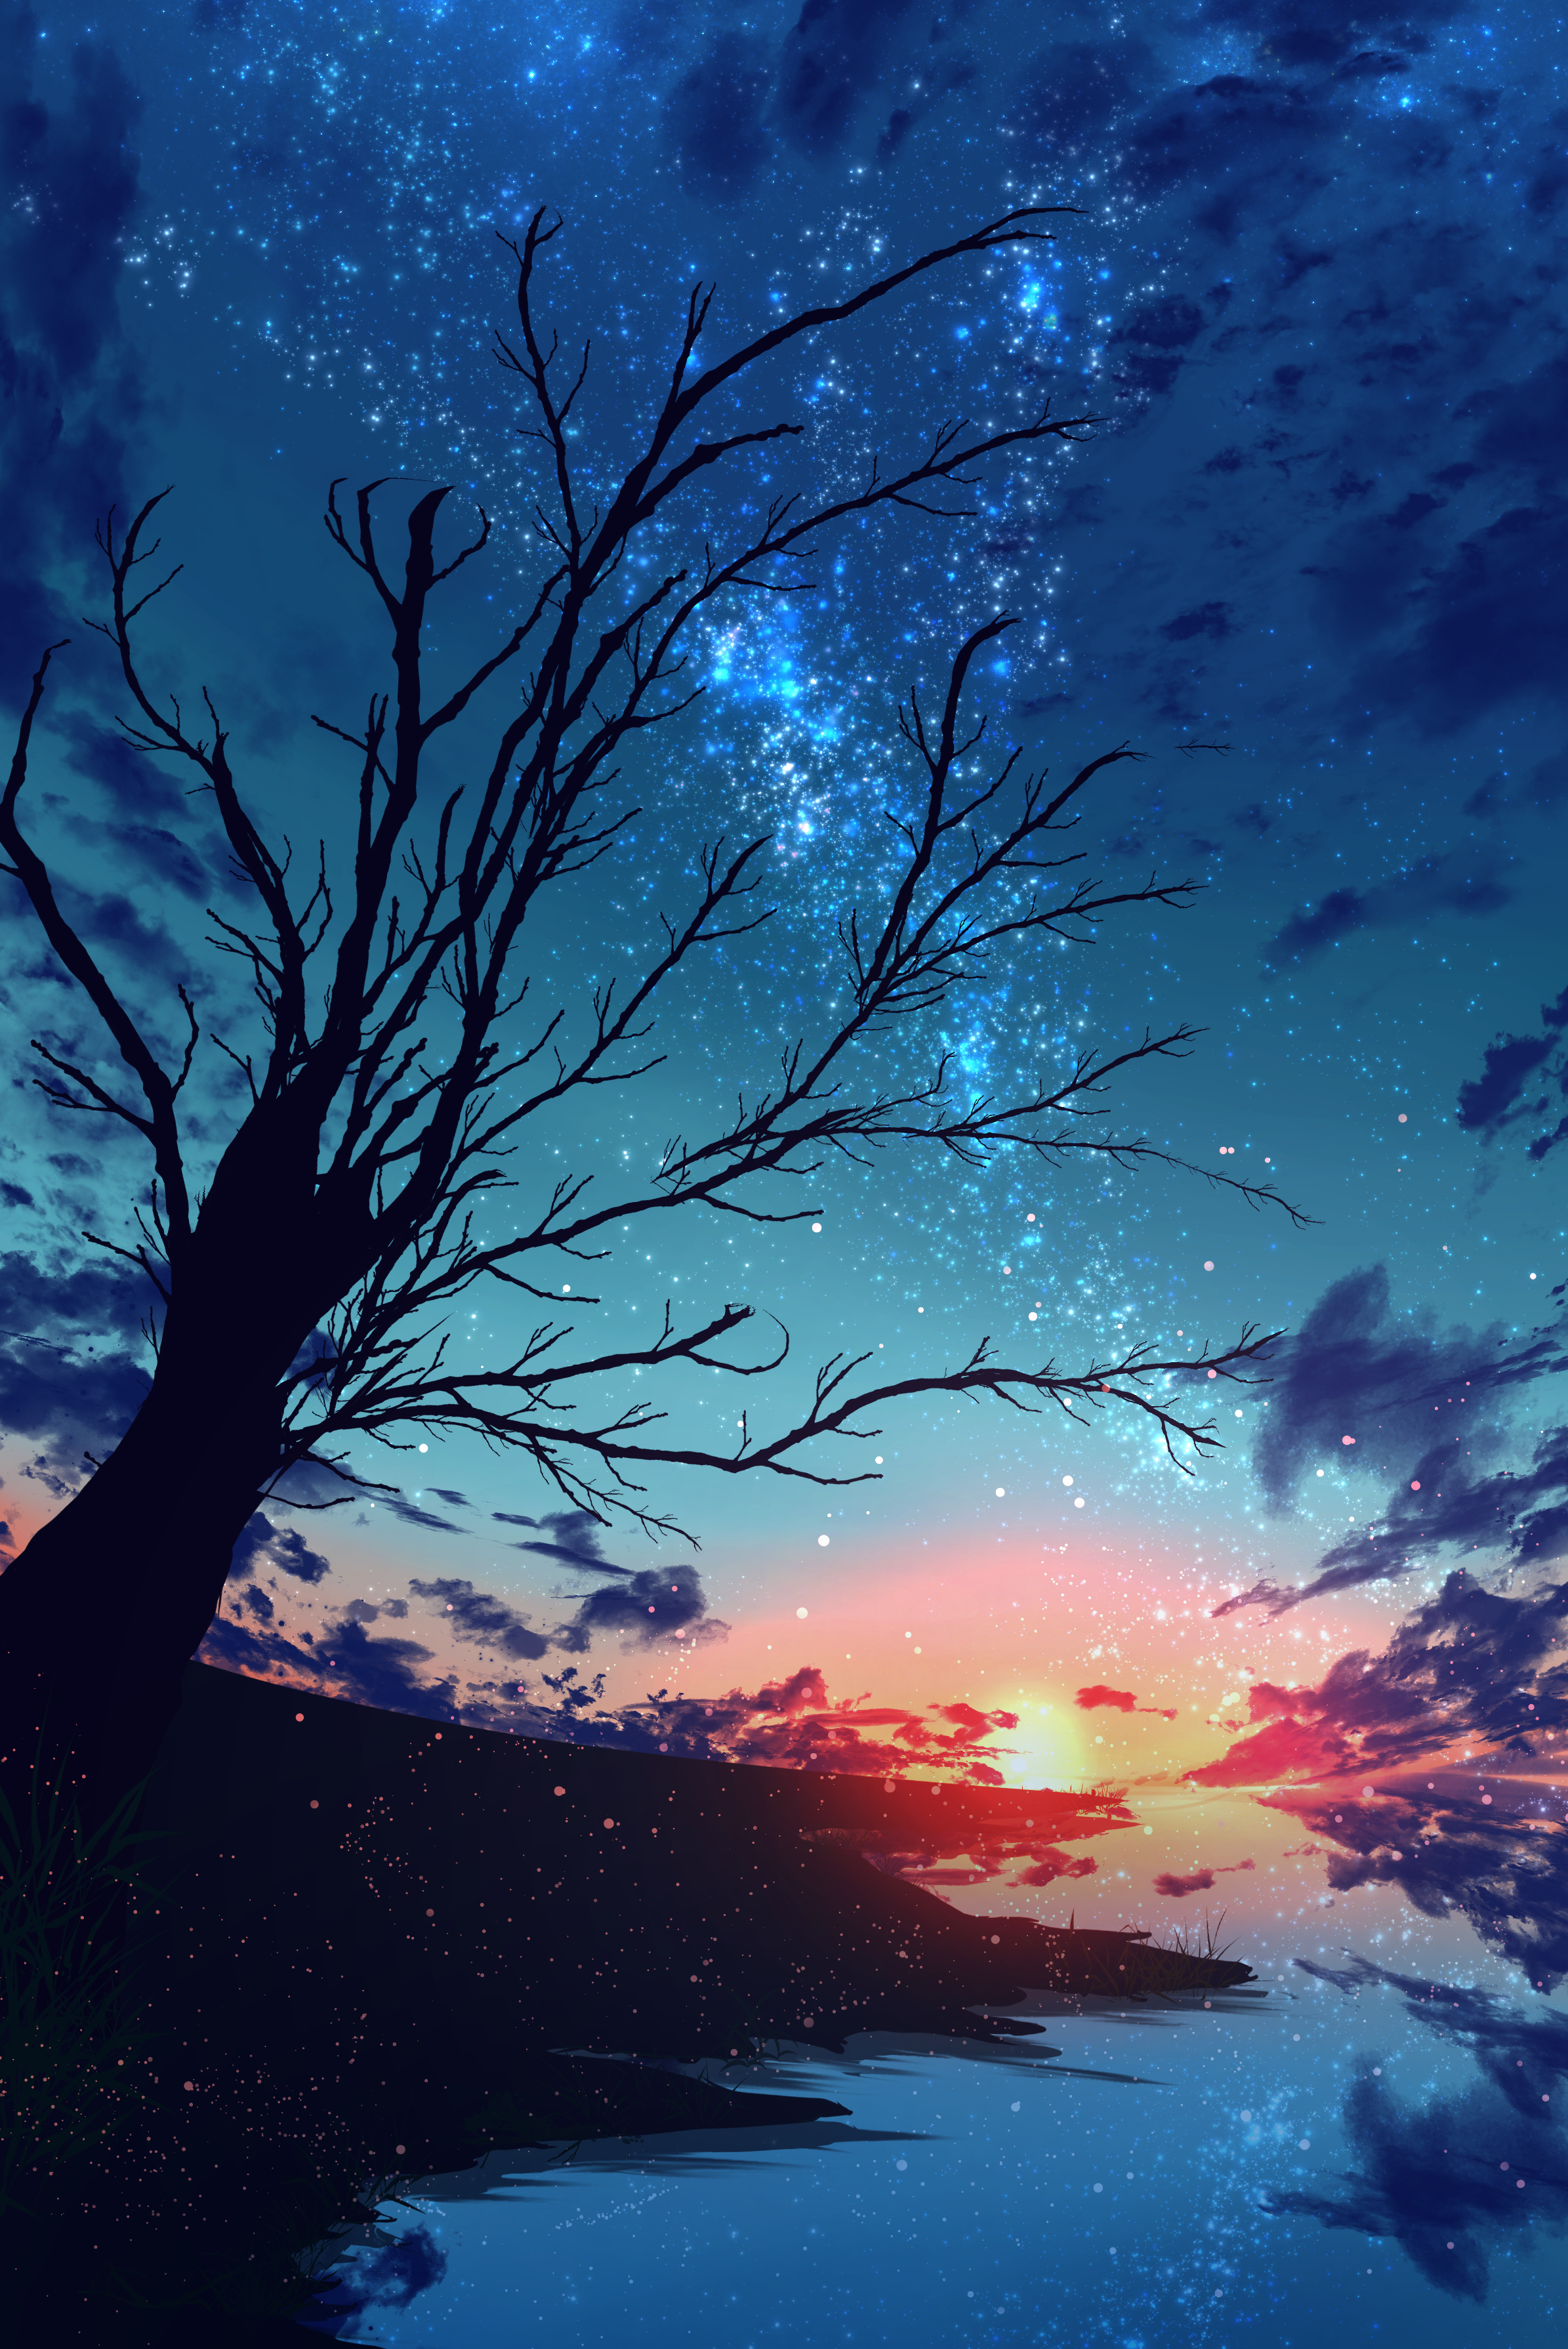 New Lock Screen Wallpapers sunset, nebula, art, stars, wood, tree, branches, particles